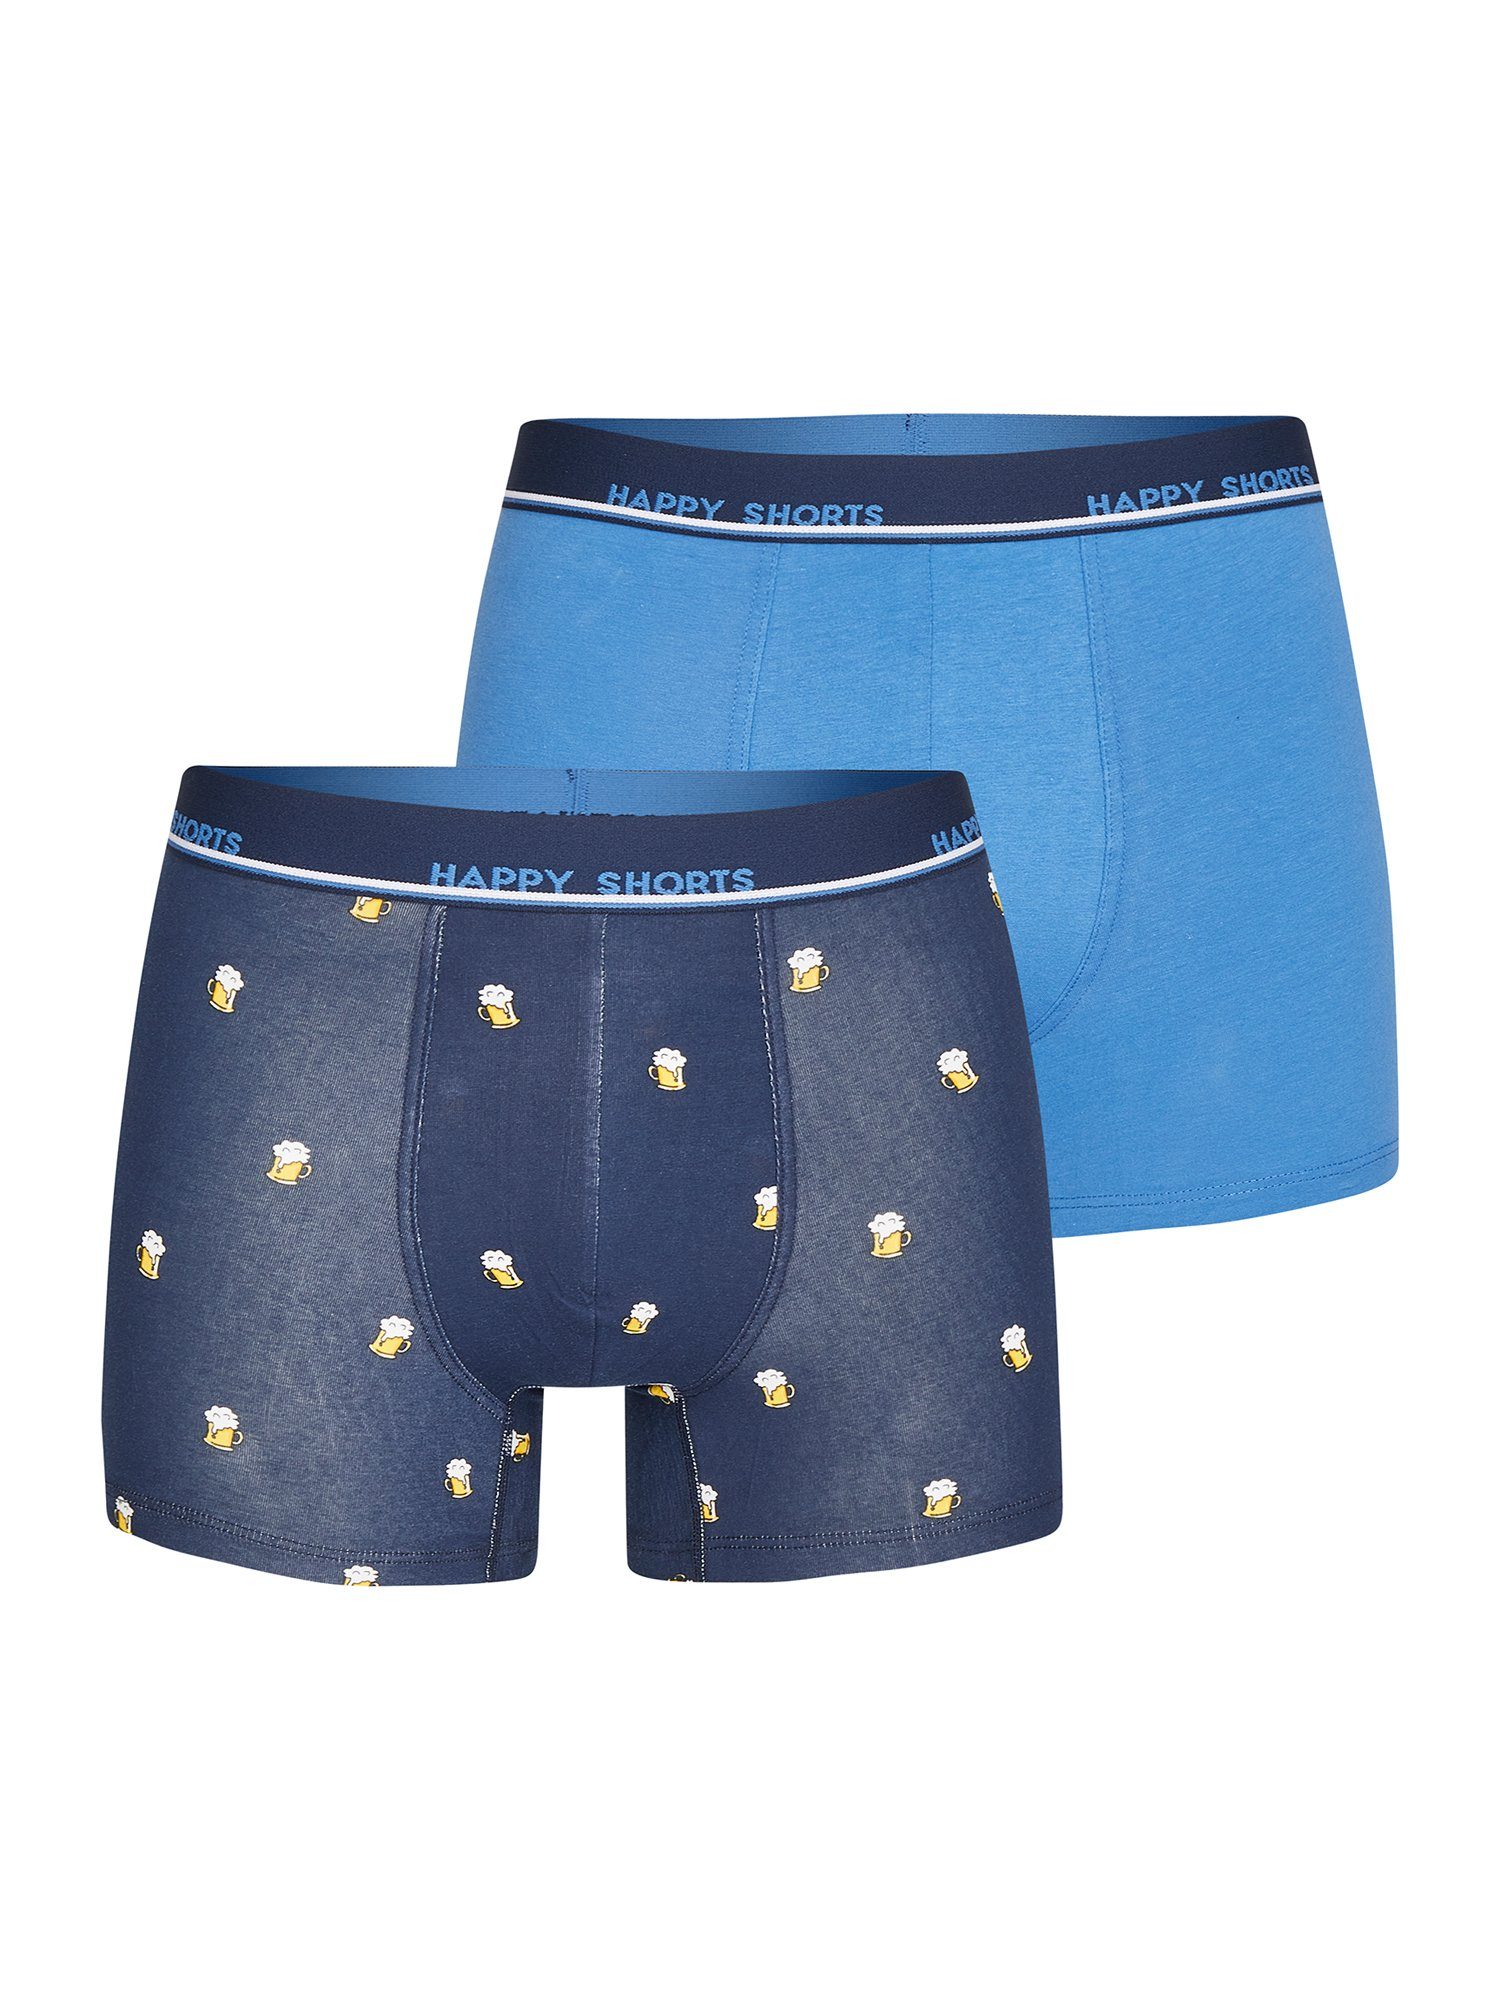 Beer SHORTS HAPPY Boxer (2-St)